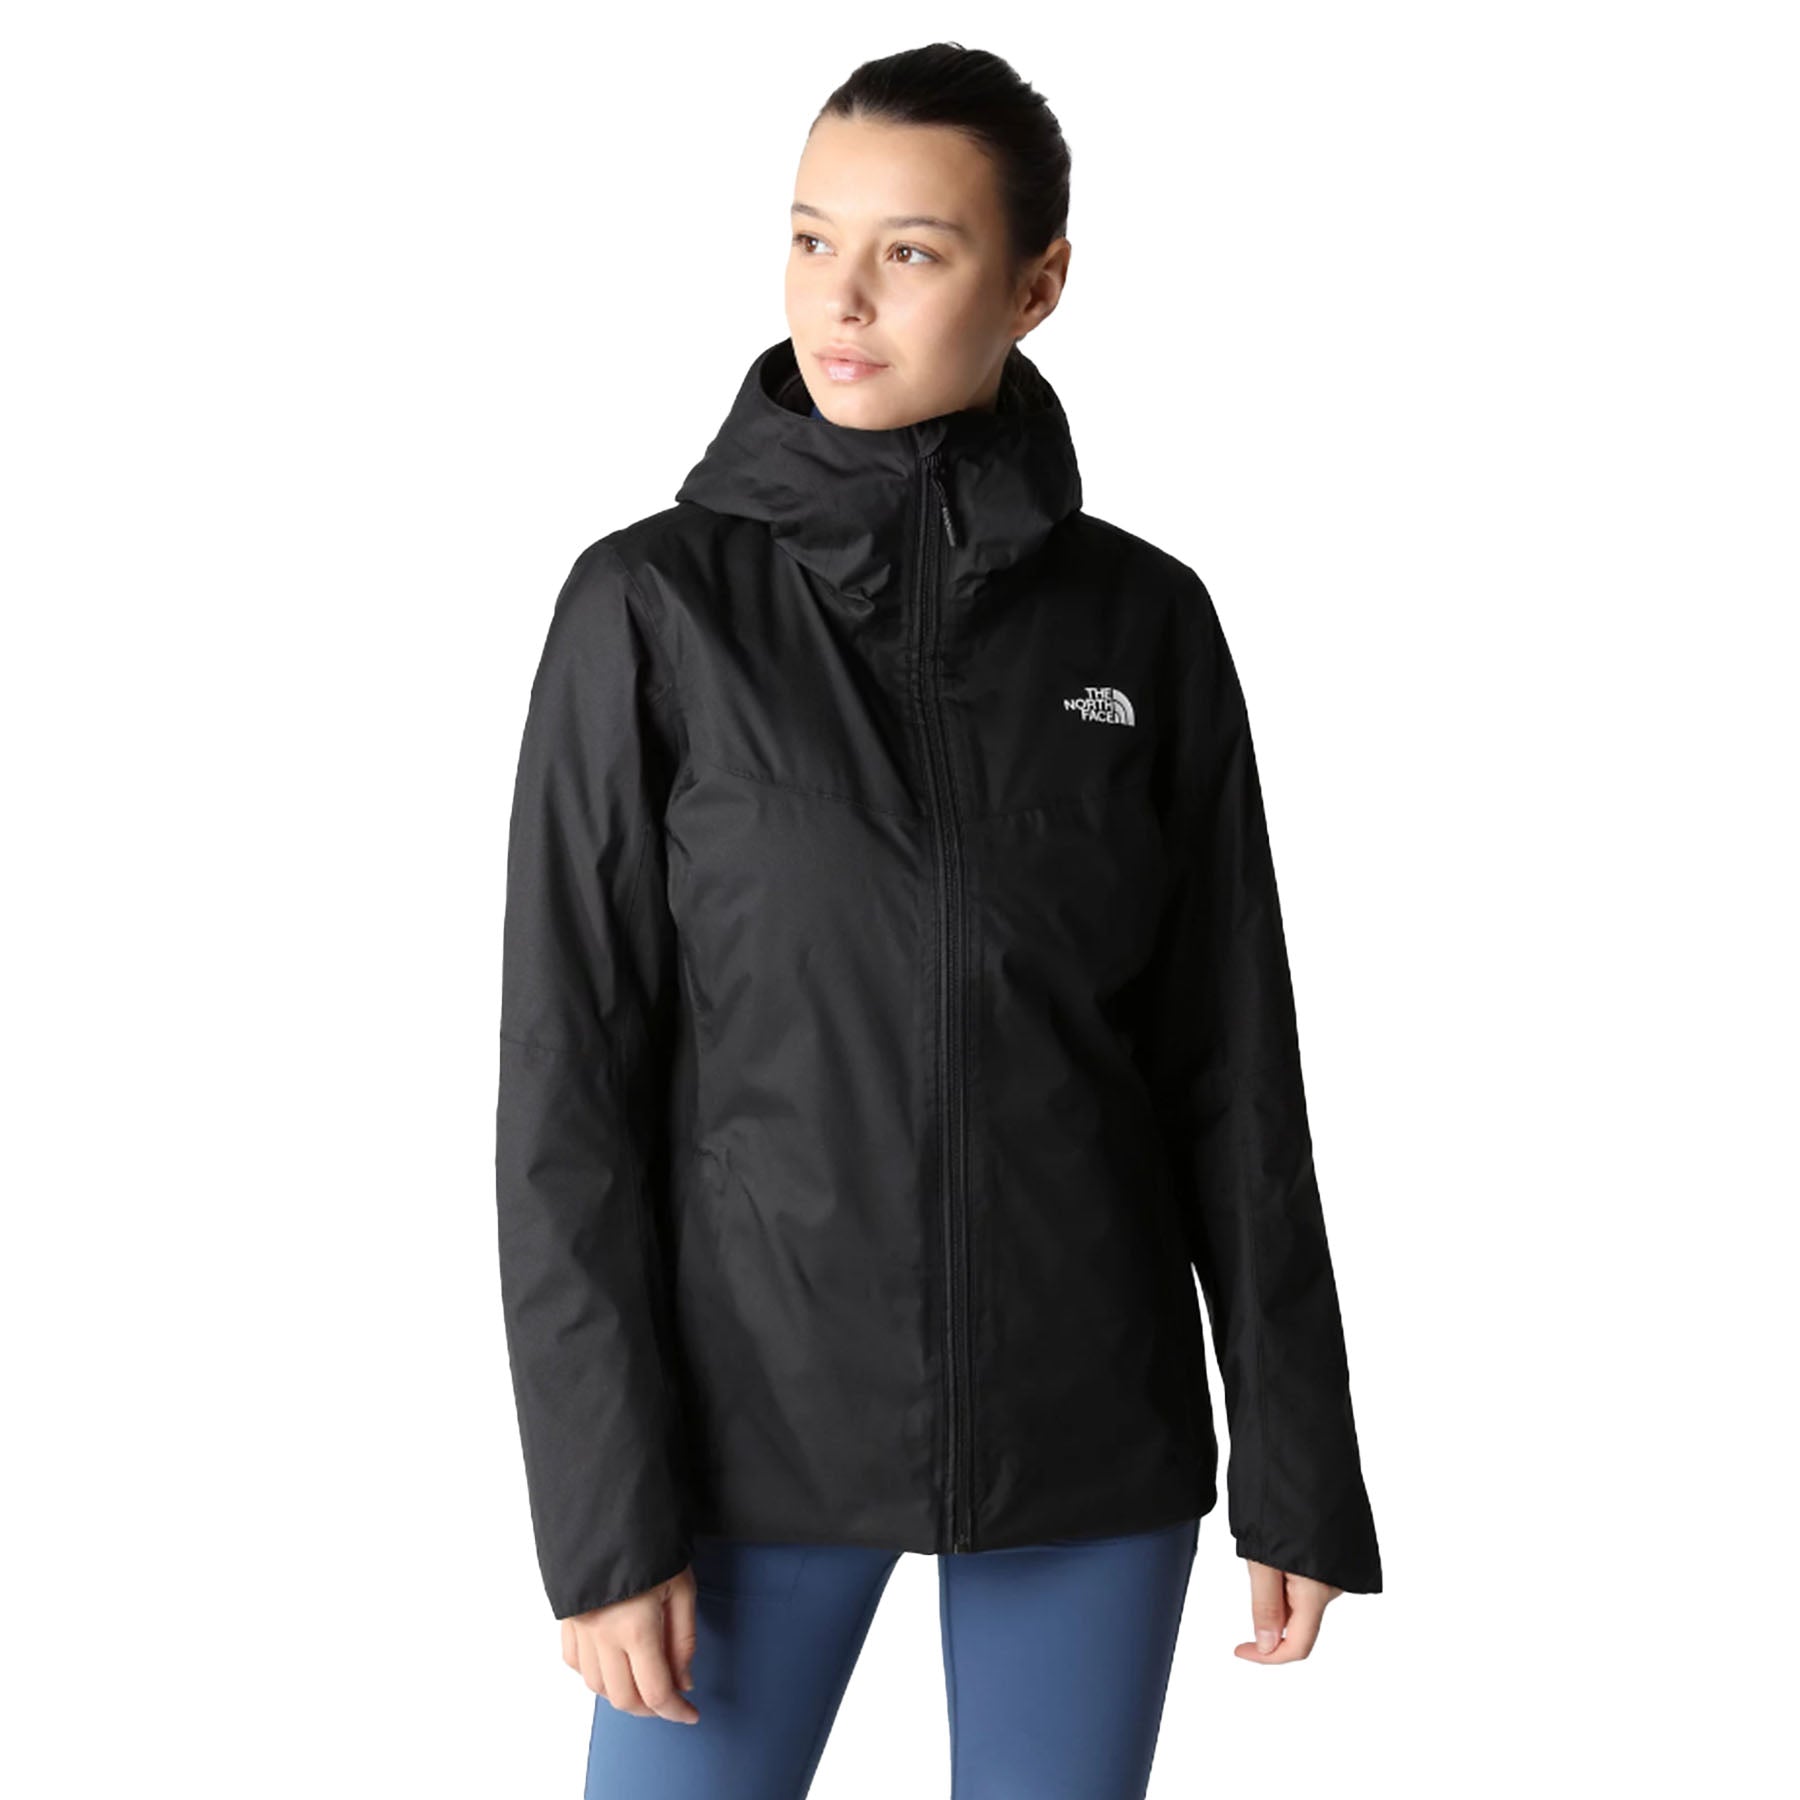 Blusa The North Face - 2nd Chance